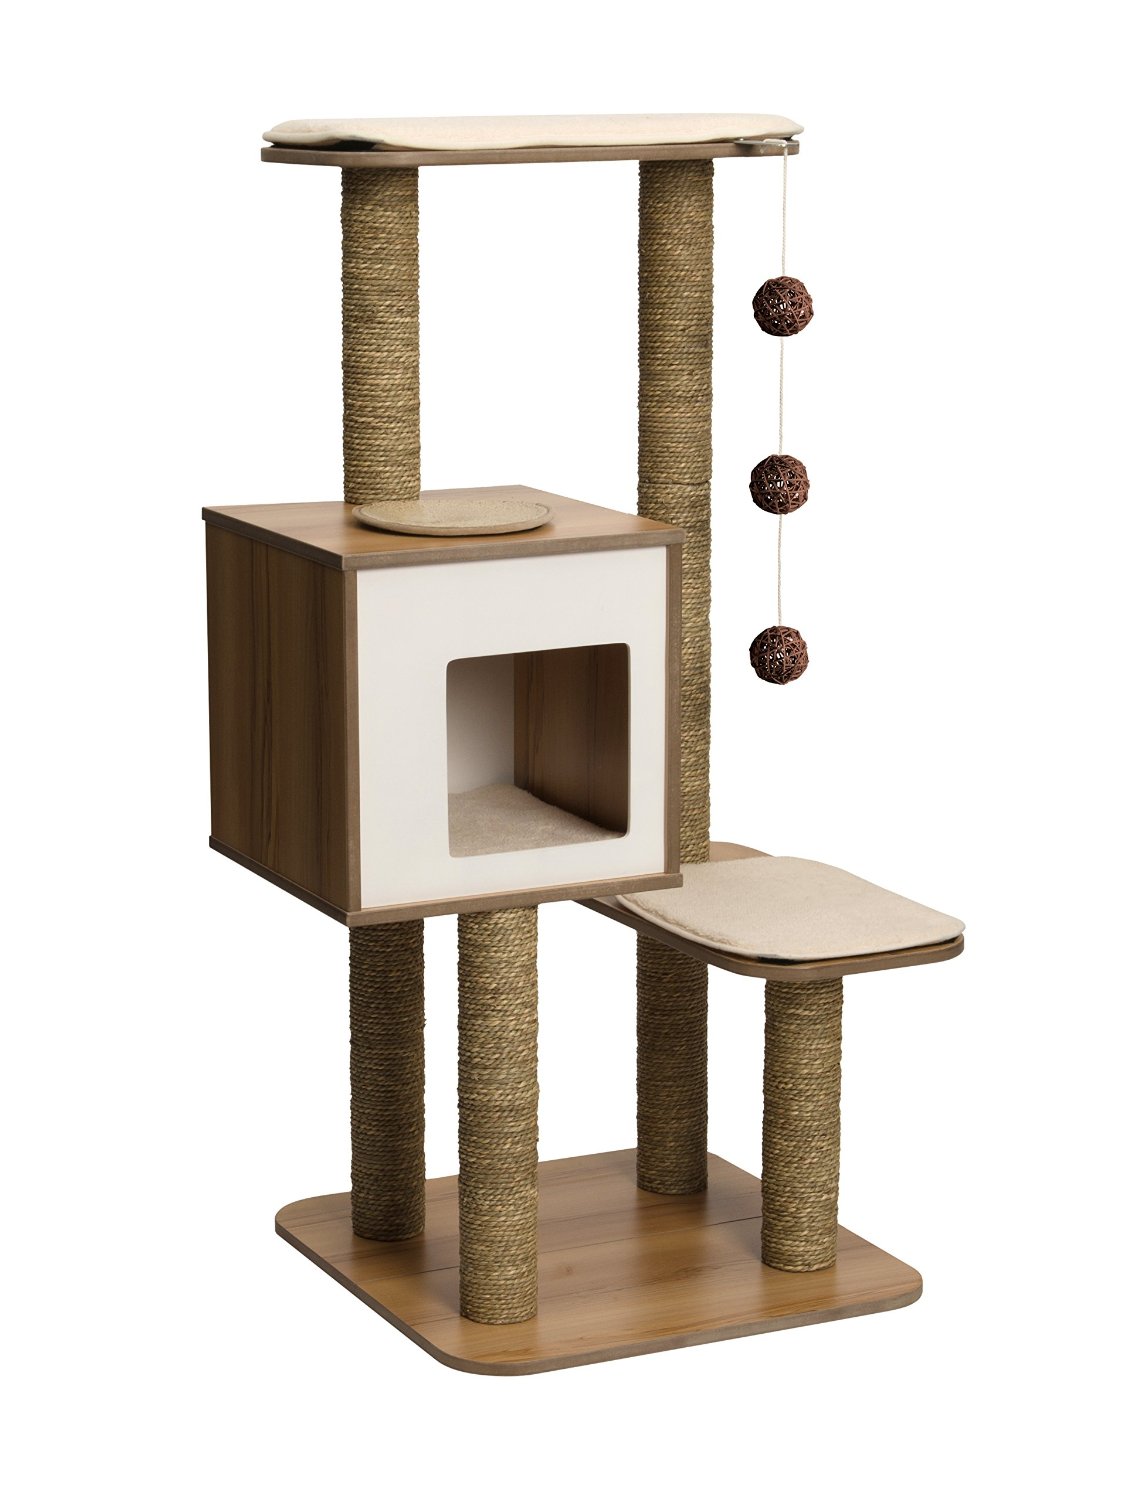 The Vesper Cat Tree LOWEST PRICES GUARANTEED FREE DELIVERY